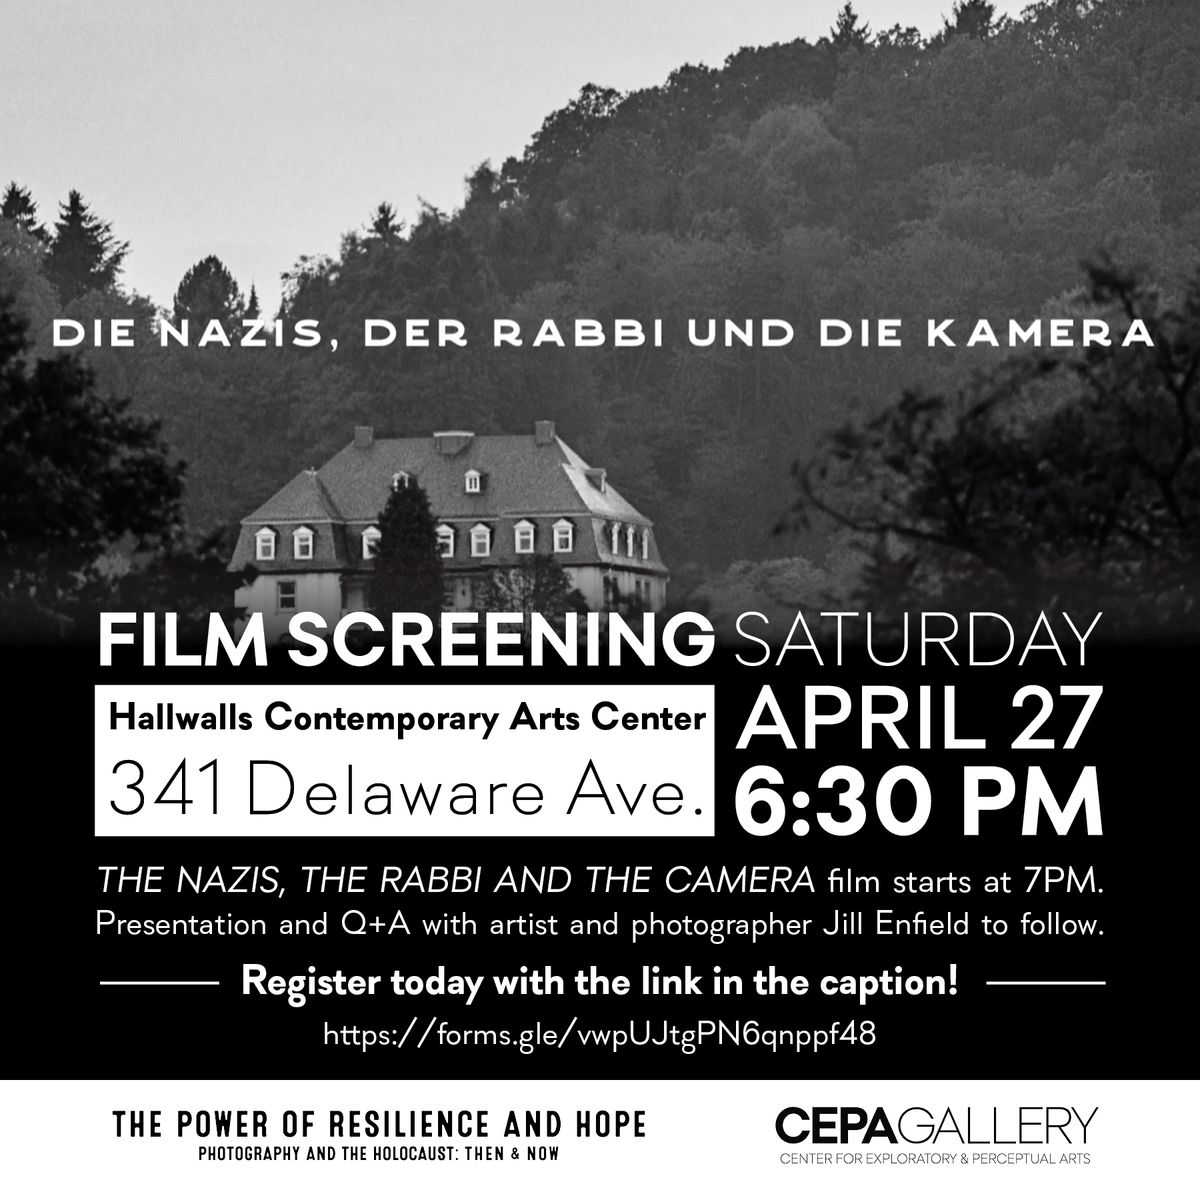 Film Screening of The Nazis, the Rabbi and the Camera